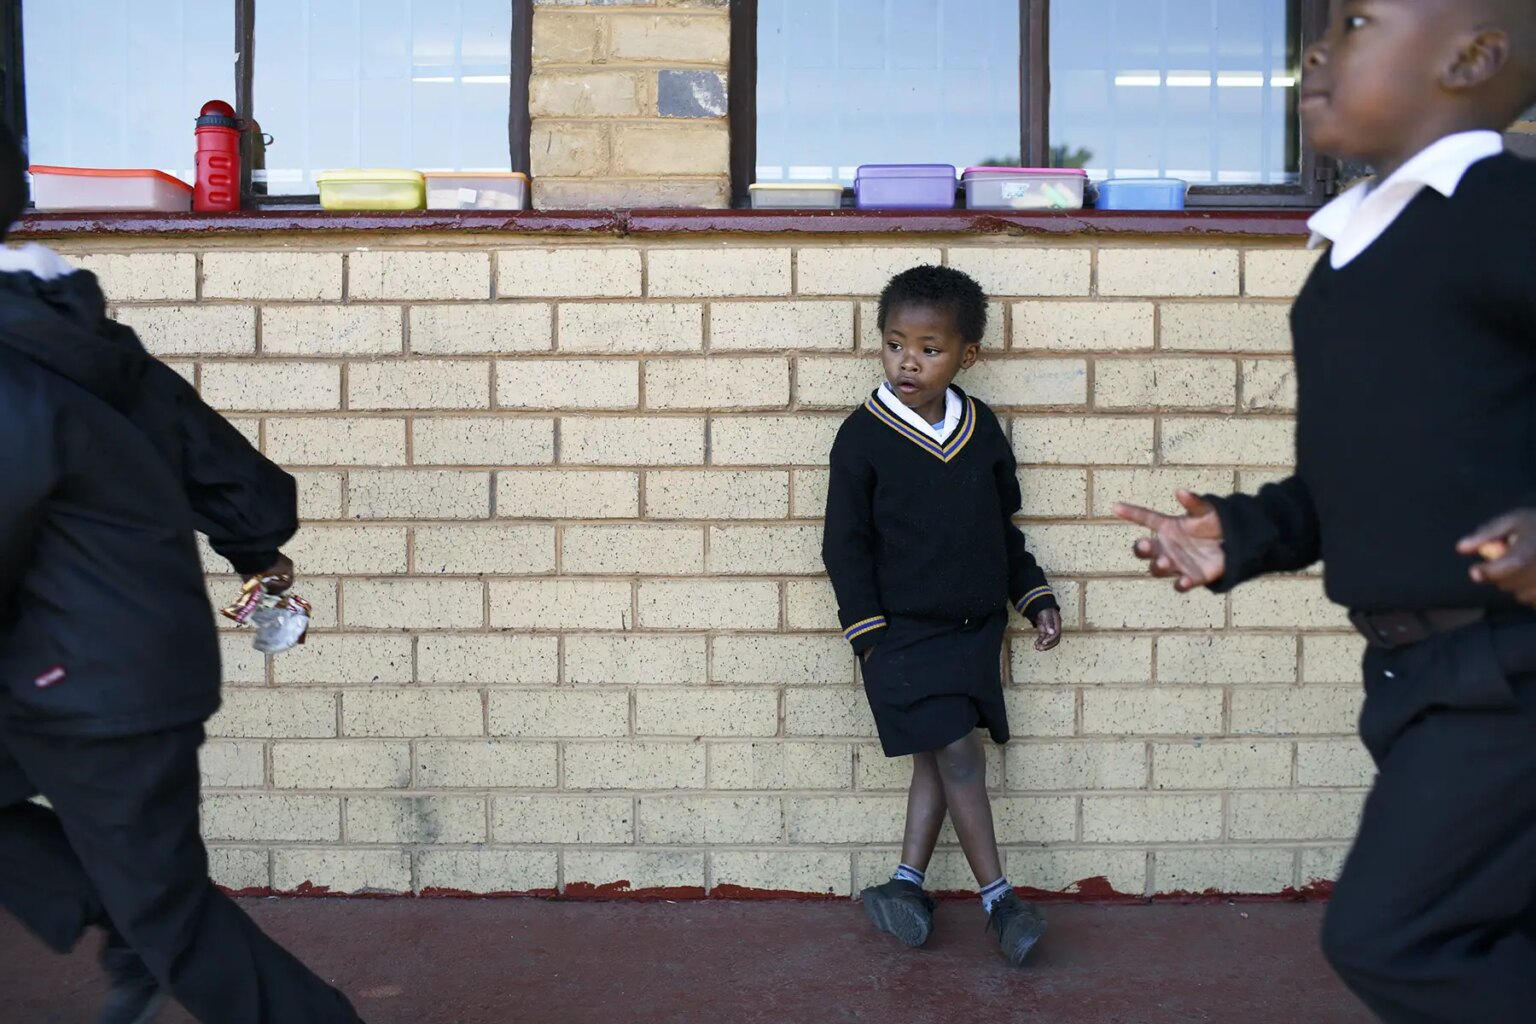 Young child in school uniform leans against a brick wall, other children run past